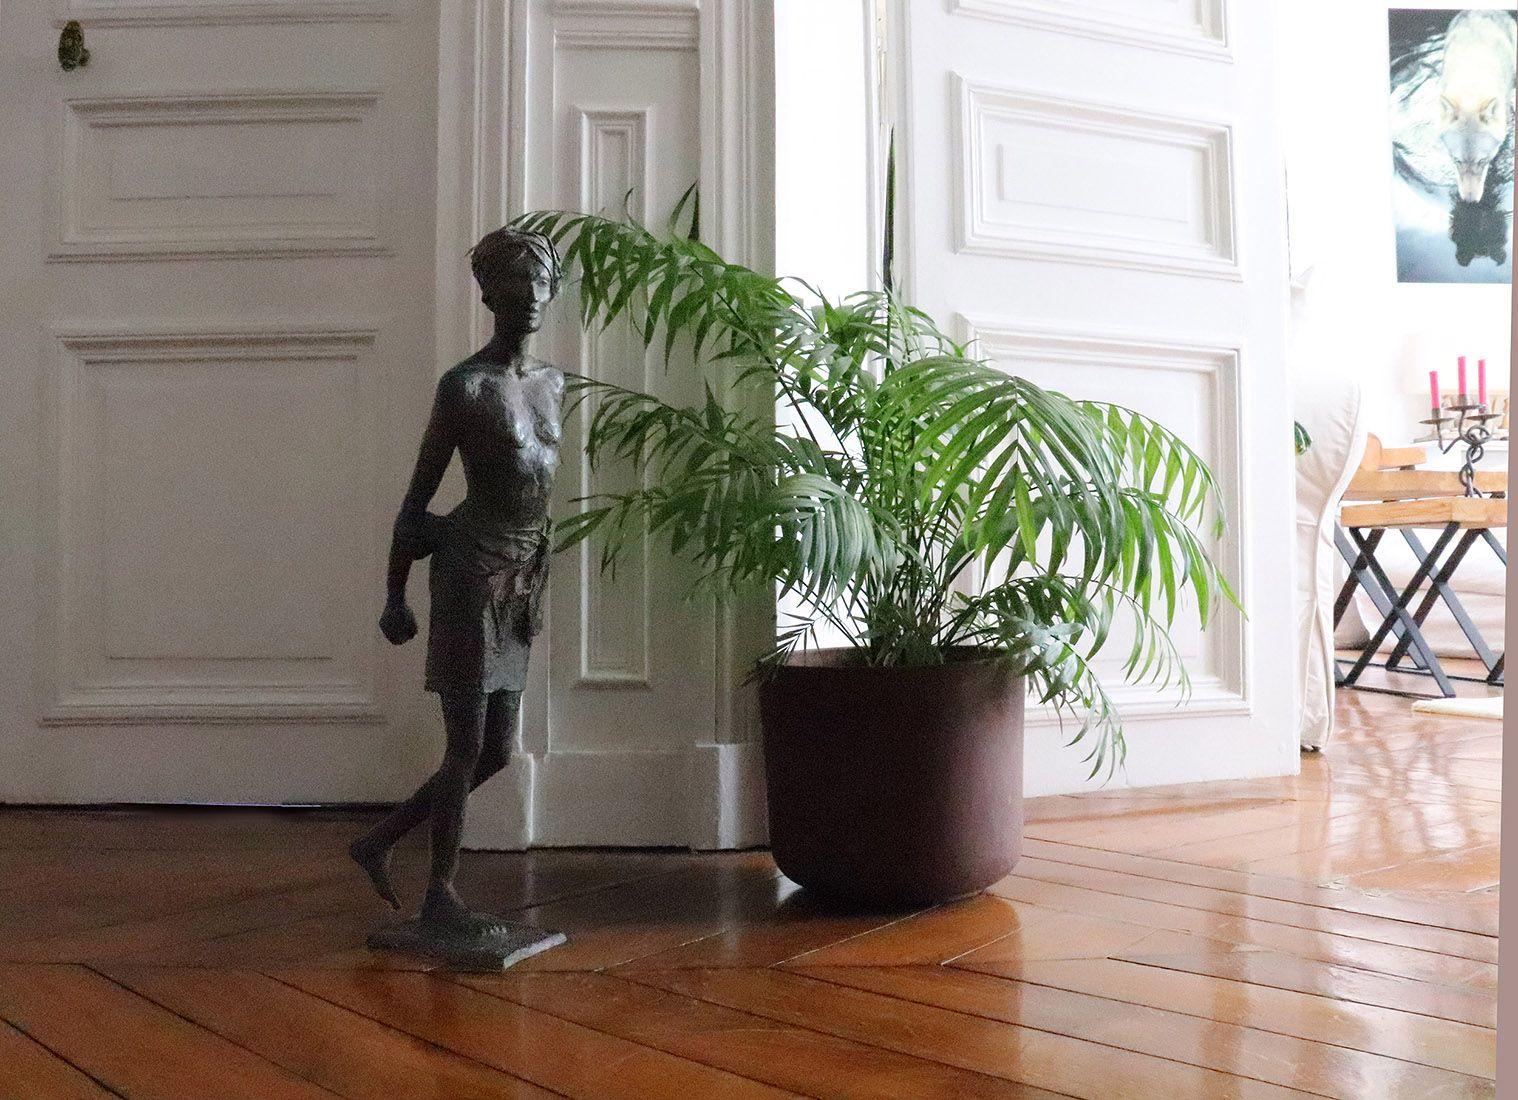 Barefoot on the sacred land by Marine de Soos - Bronze sculpture, figure, man For Sale 4